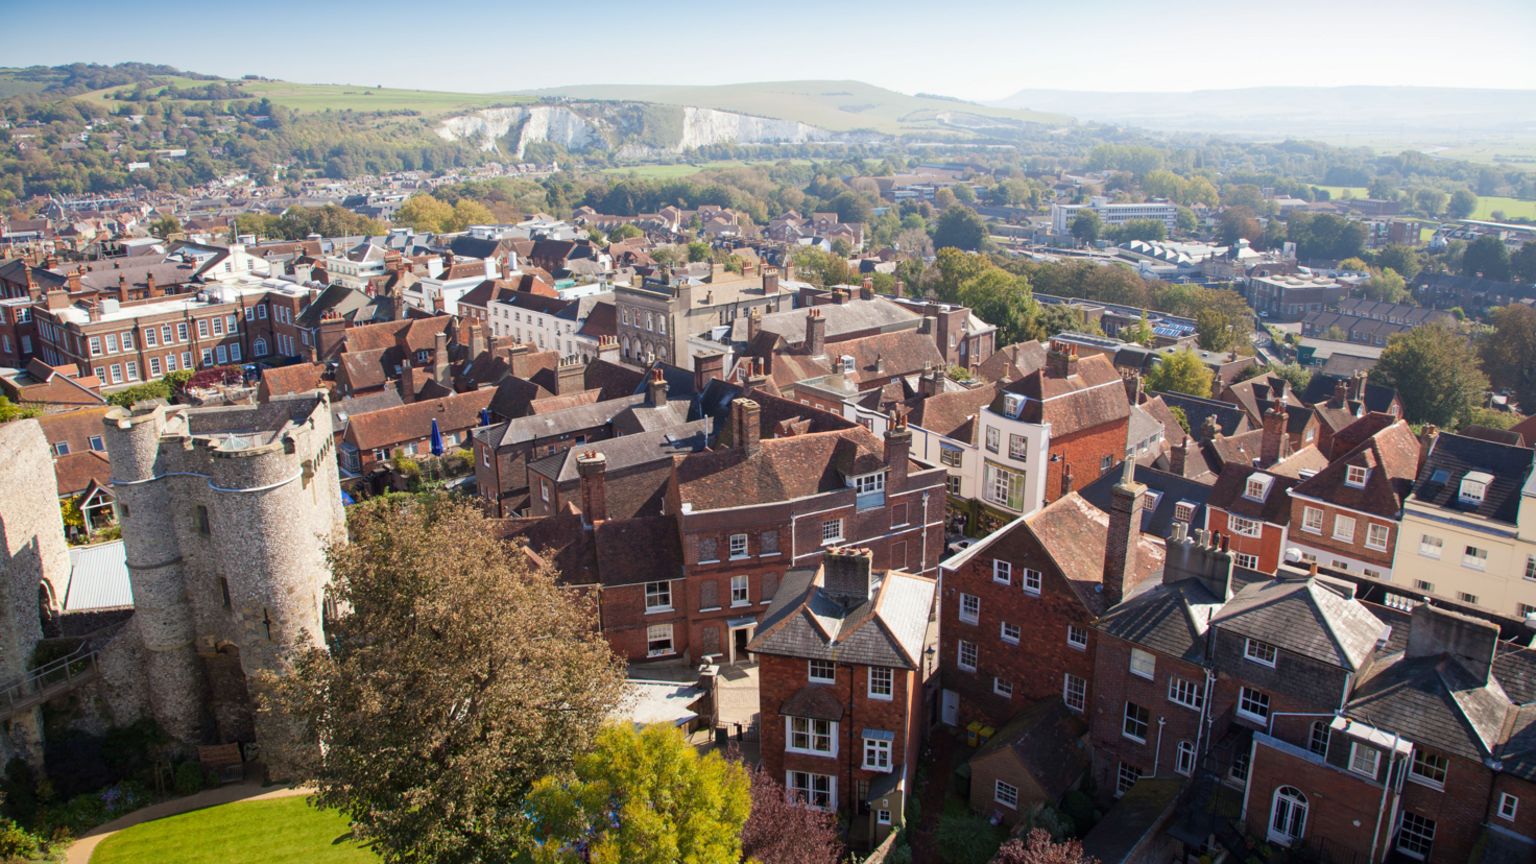 The town of Lewes seen from the air